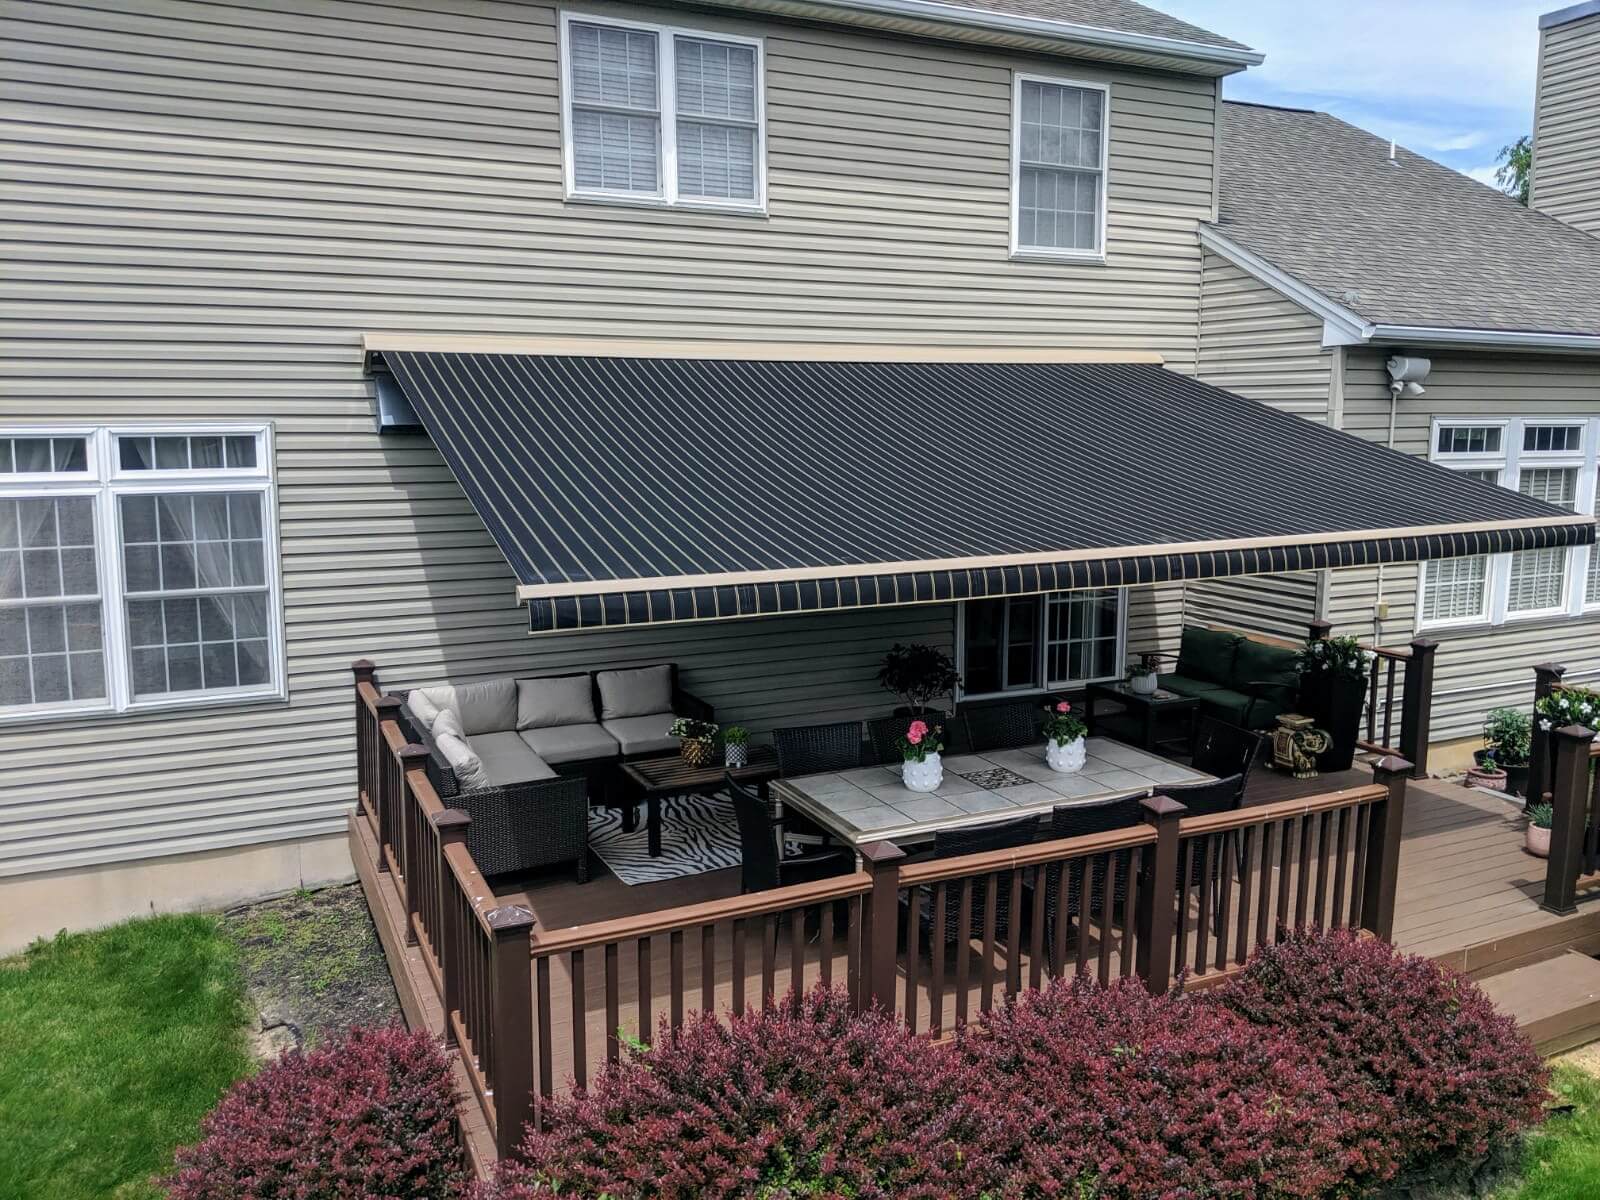 Black Awning Over Table